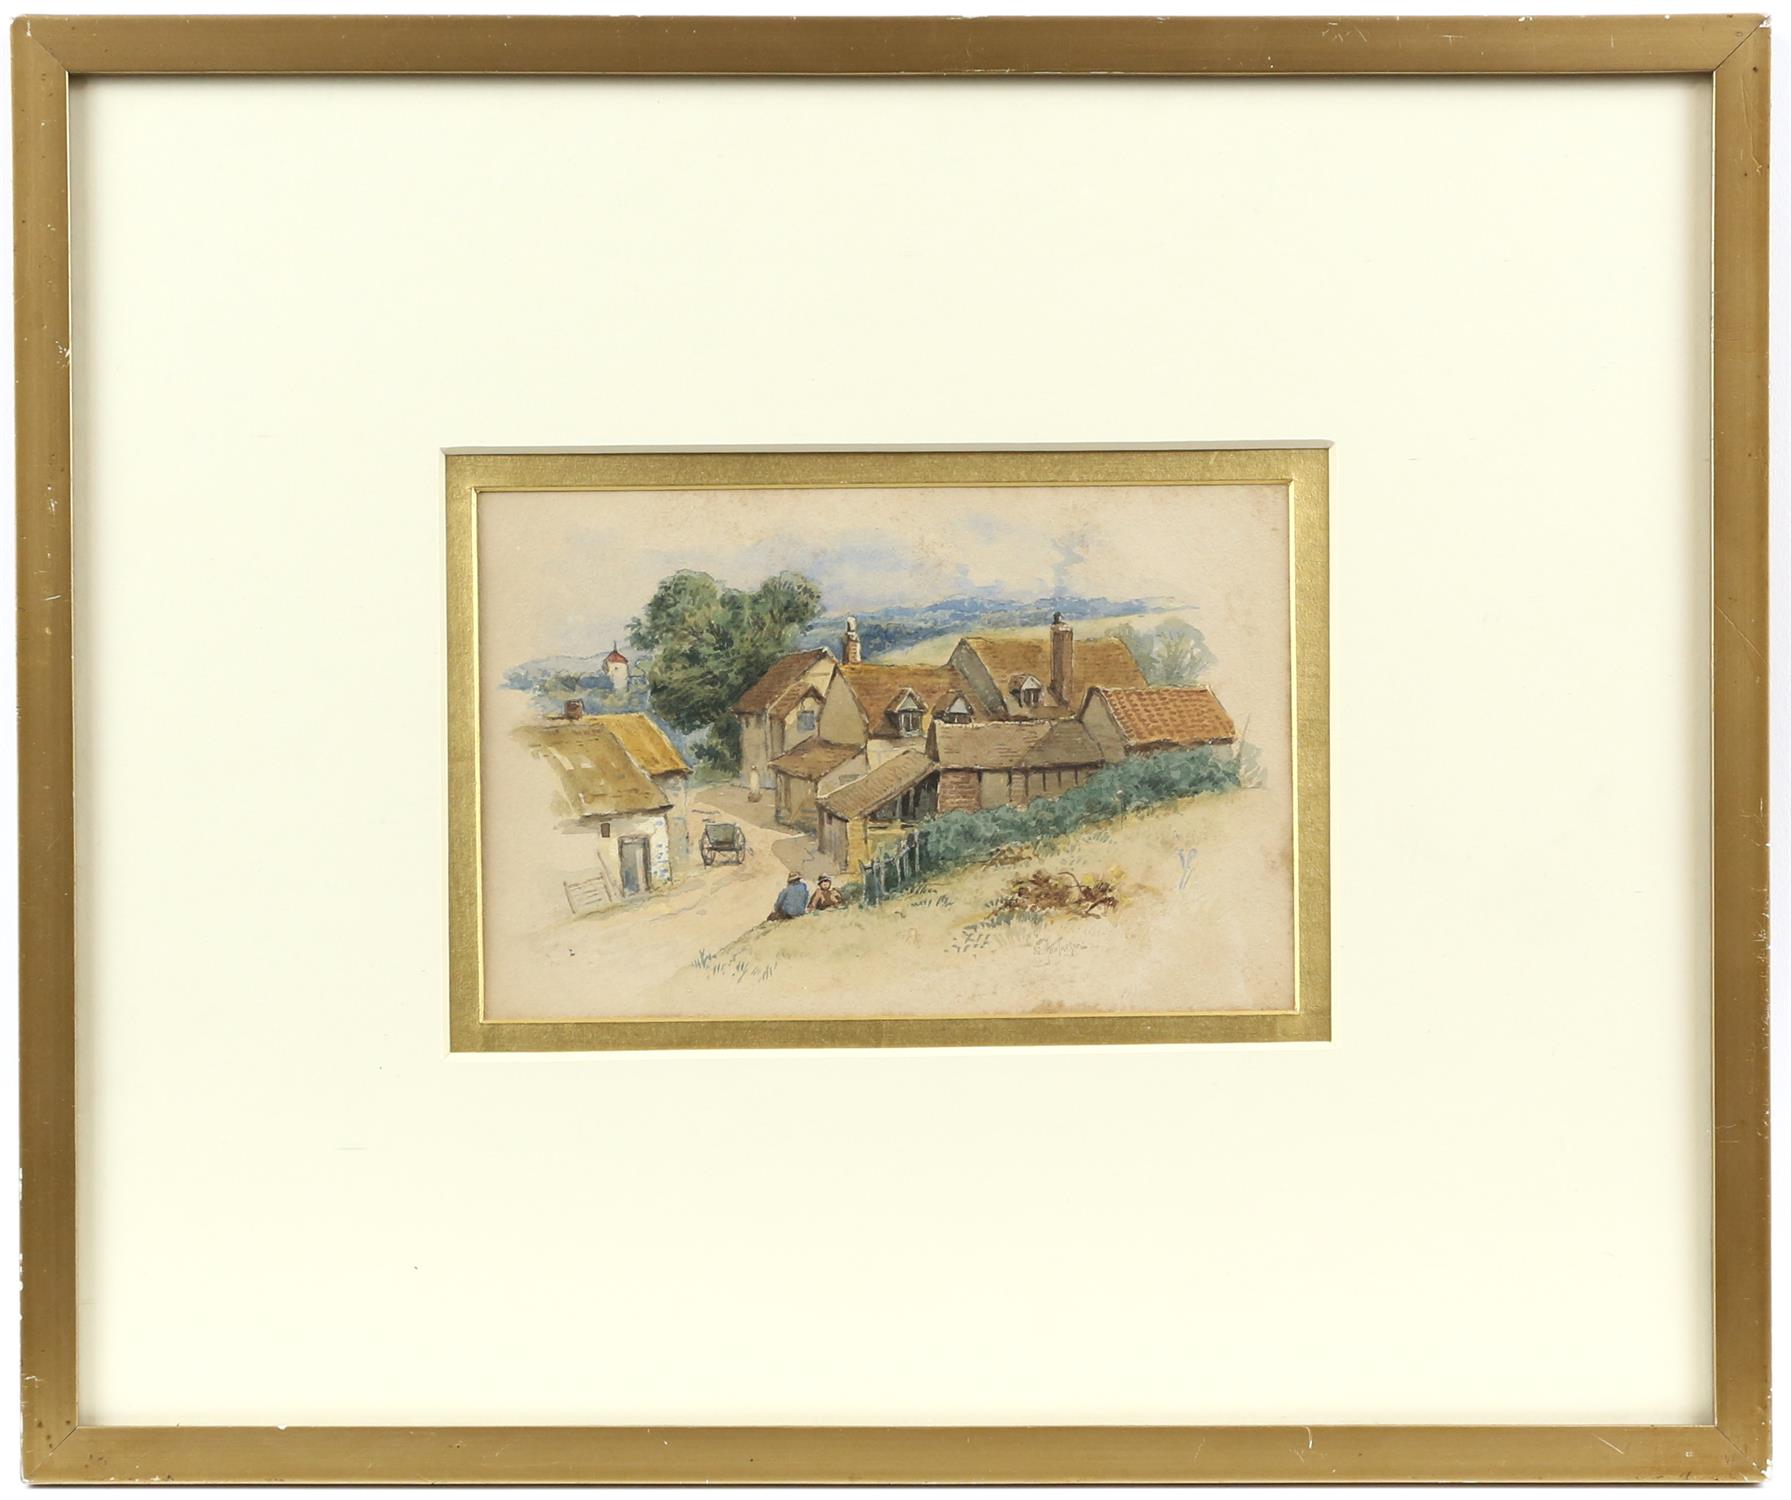 19th century, English School, village scene with figures, cart and cottages, indistinctly signed - Image 2 of 3